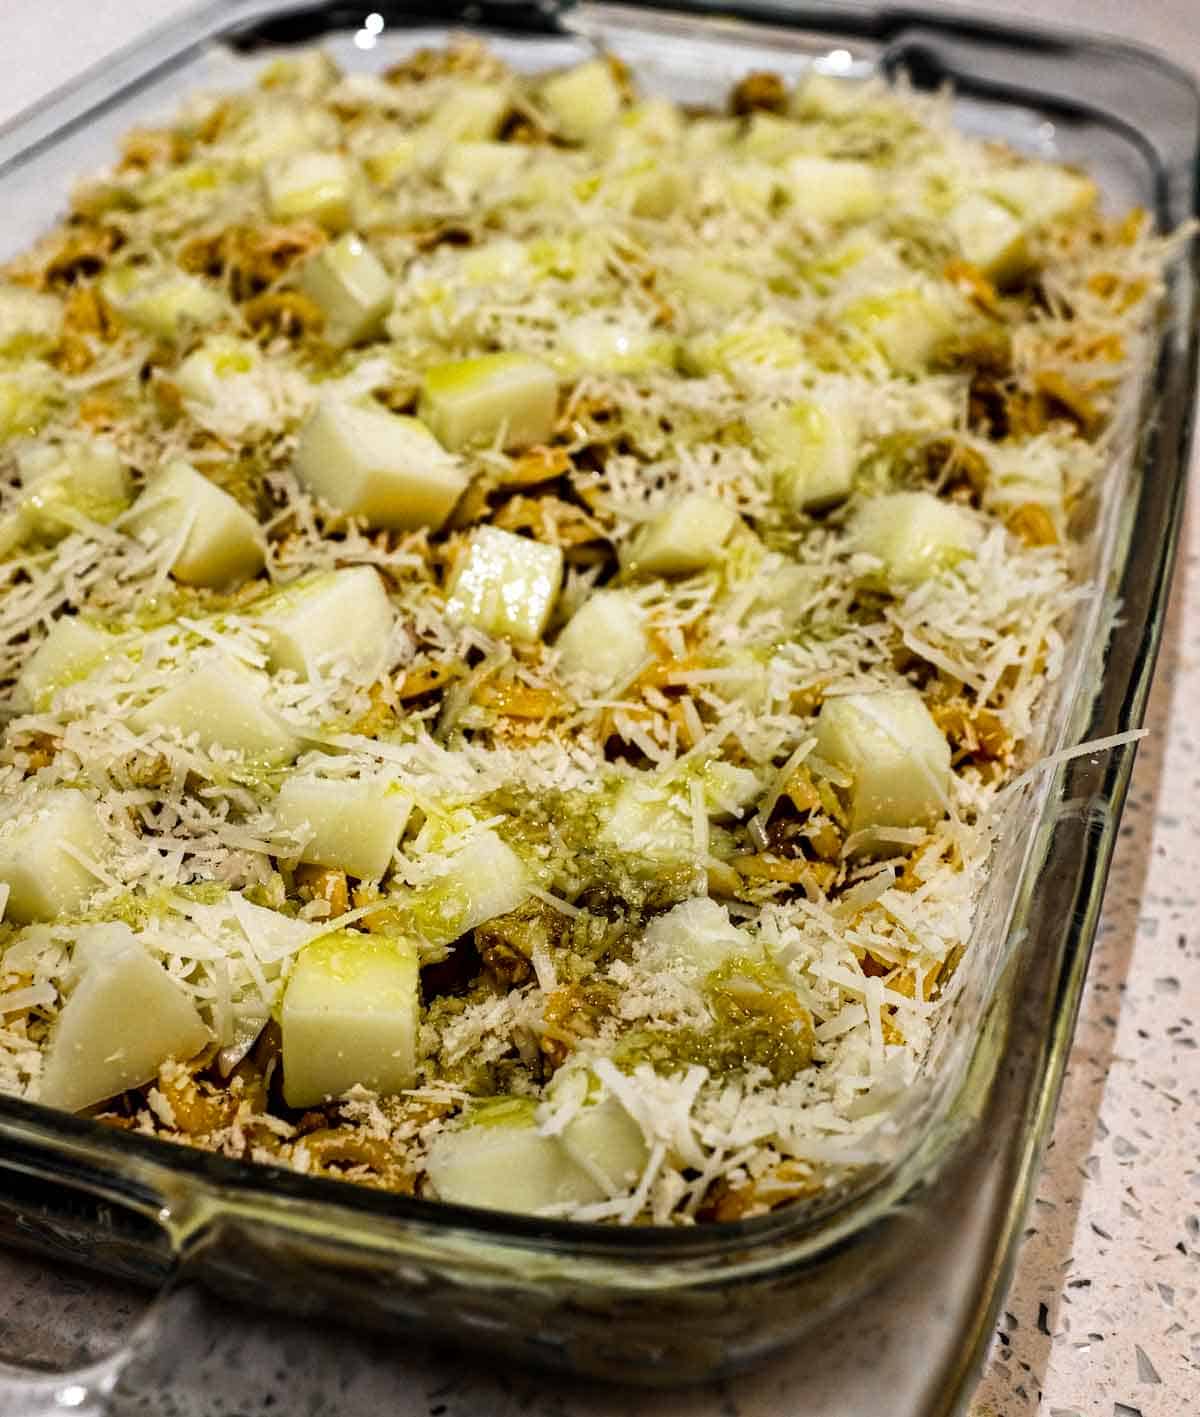 A baking dish of anelletti al forno about to go into the oven. Topped with cubes of mozzarella cheese.